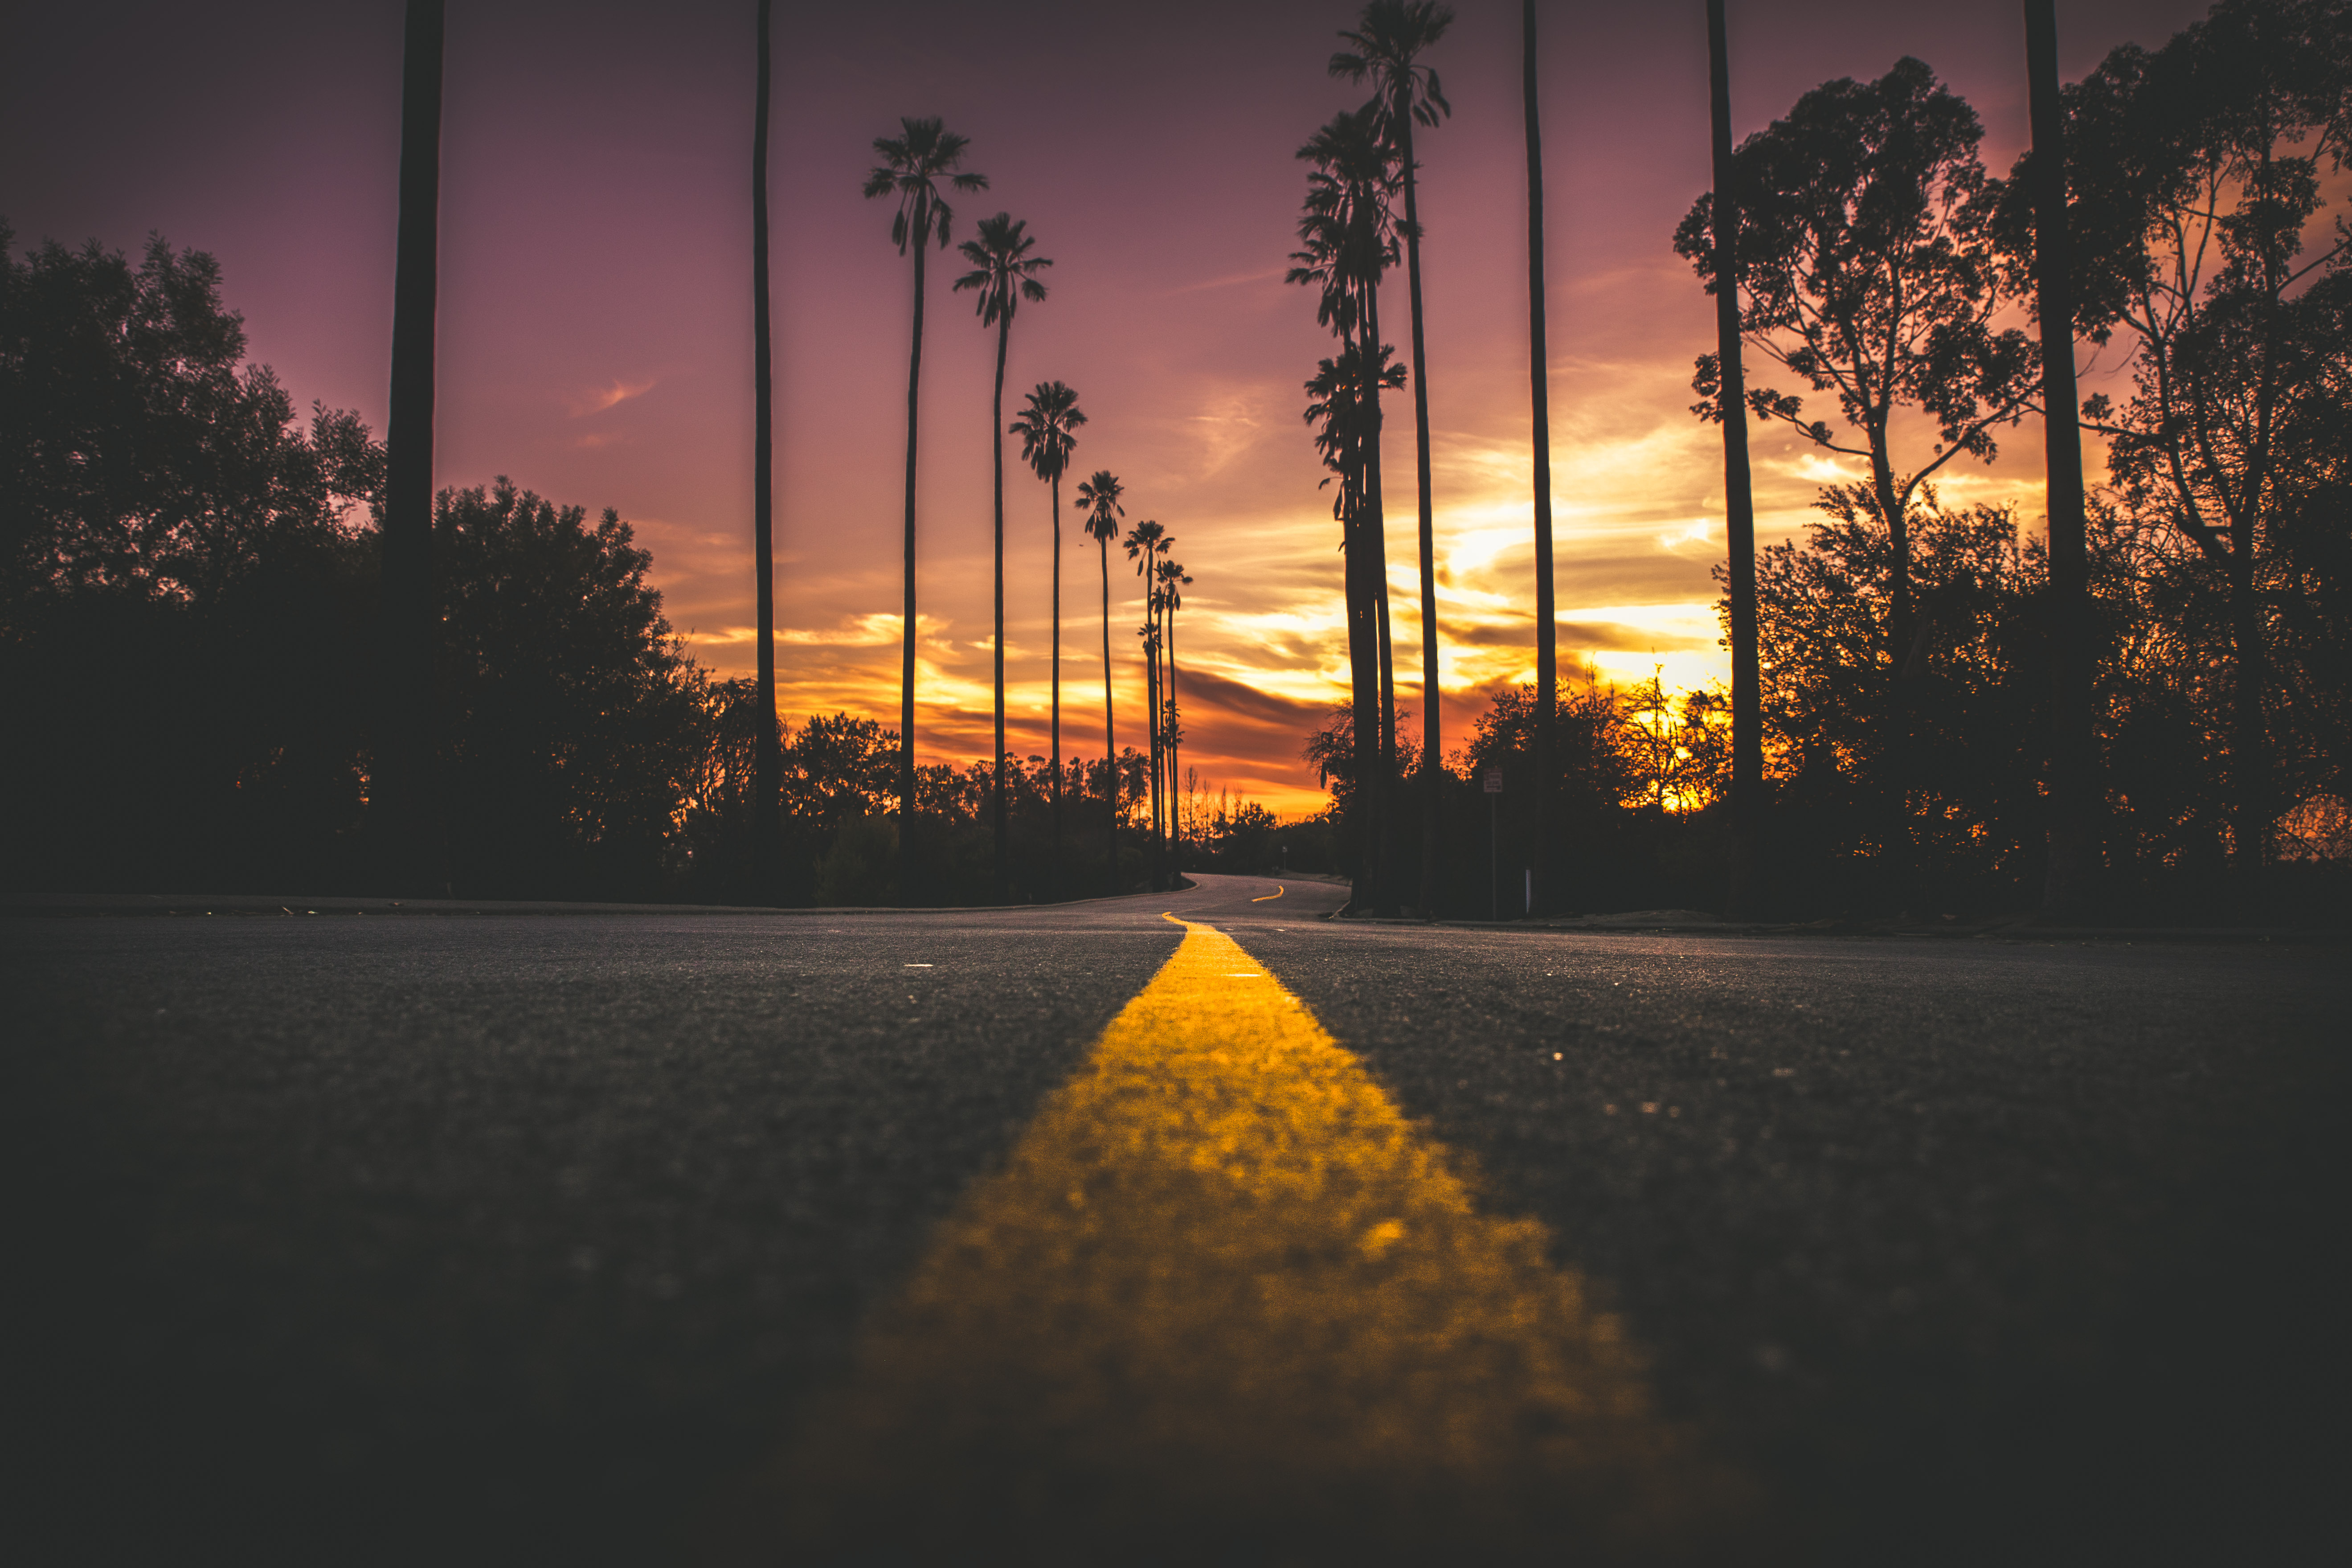 Man Made Road HD Wallpaper | Background Image